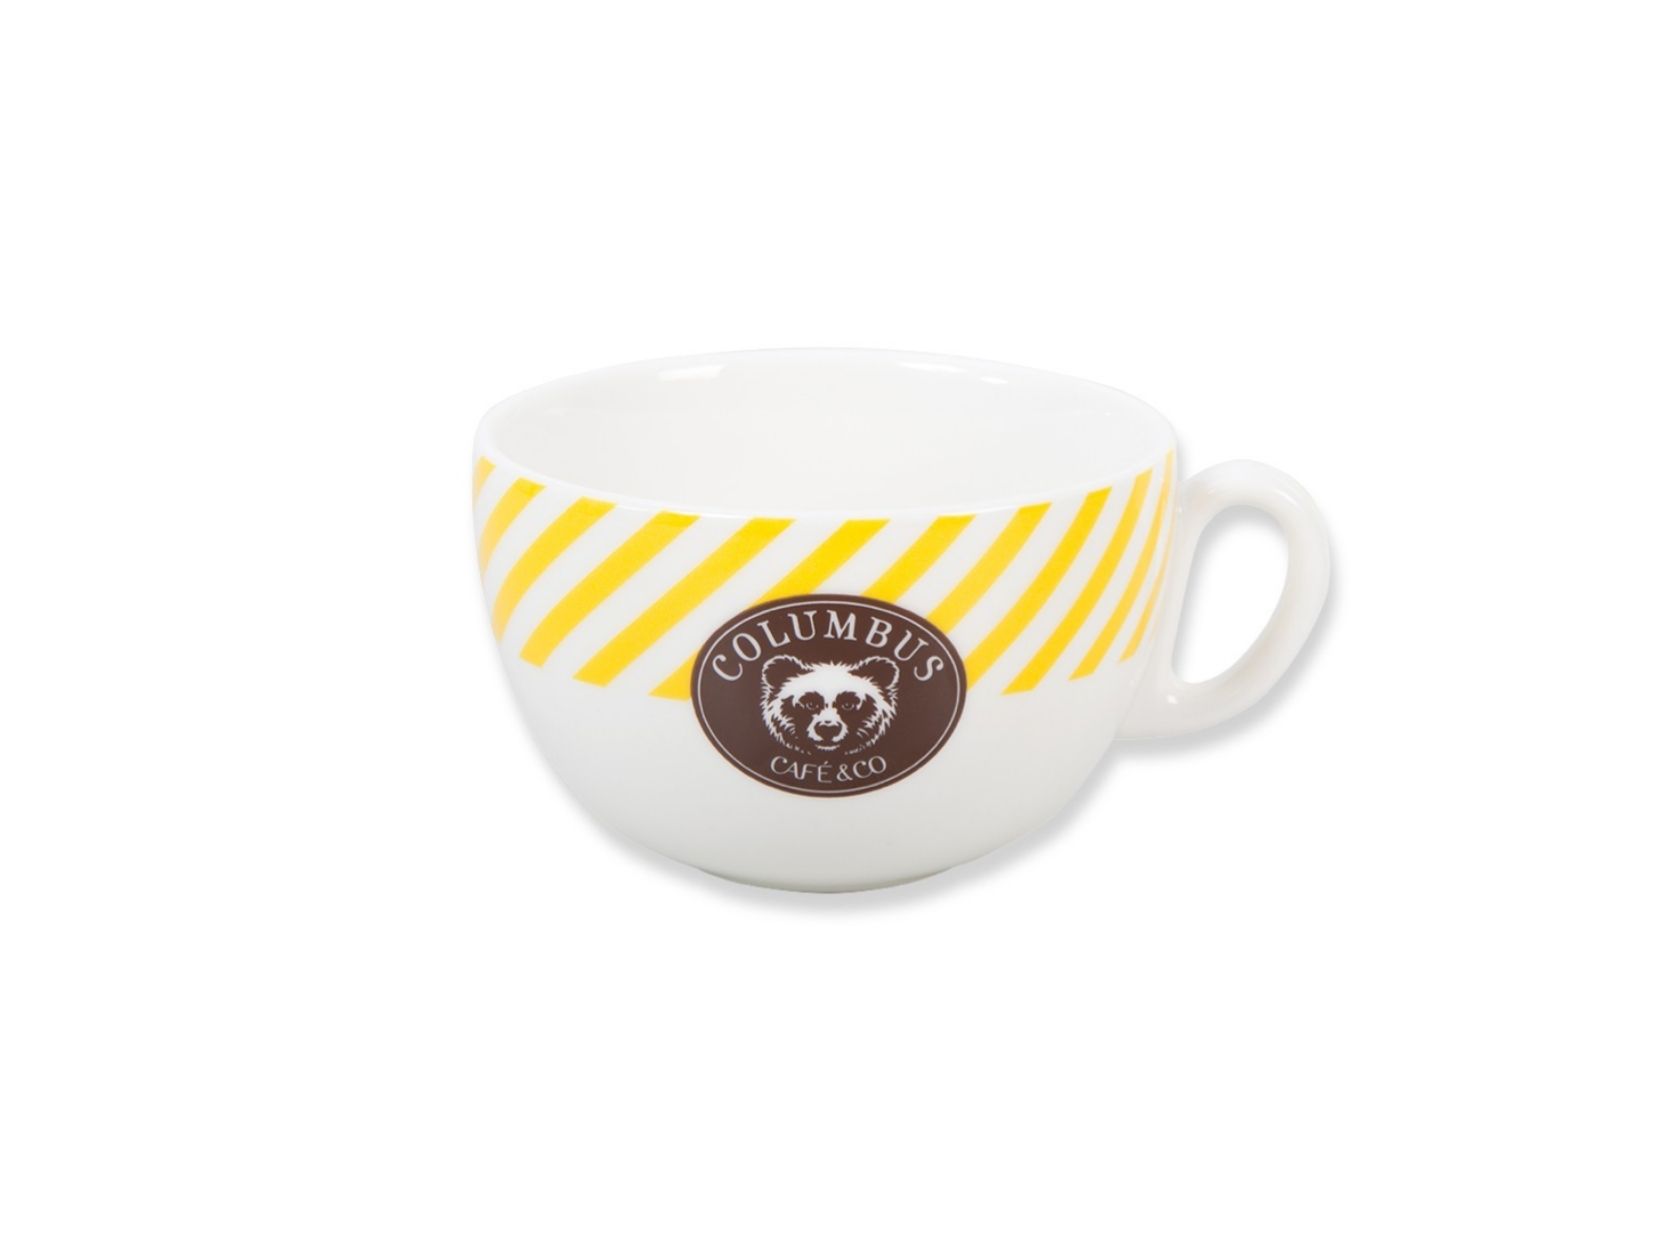 Columbus coffee cup – 45cl.